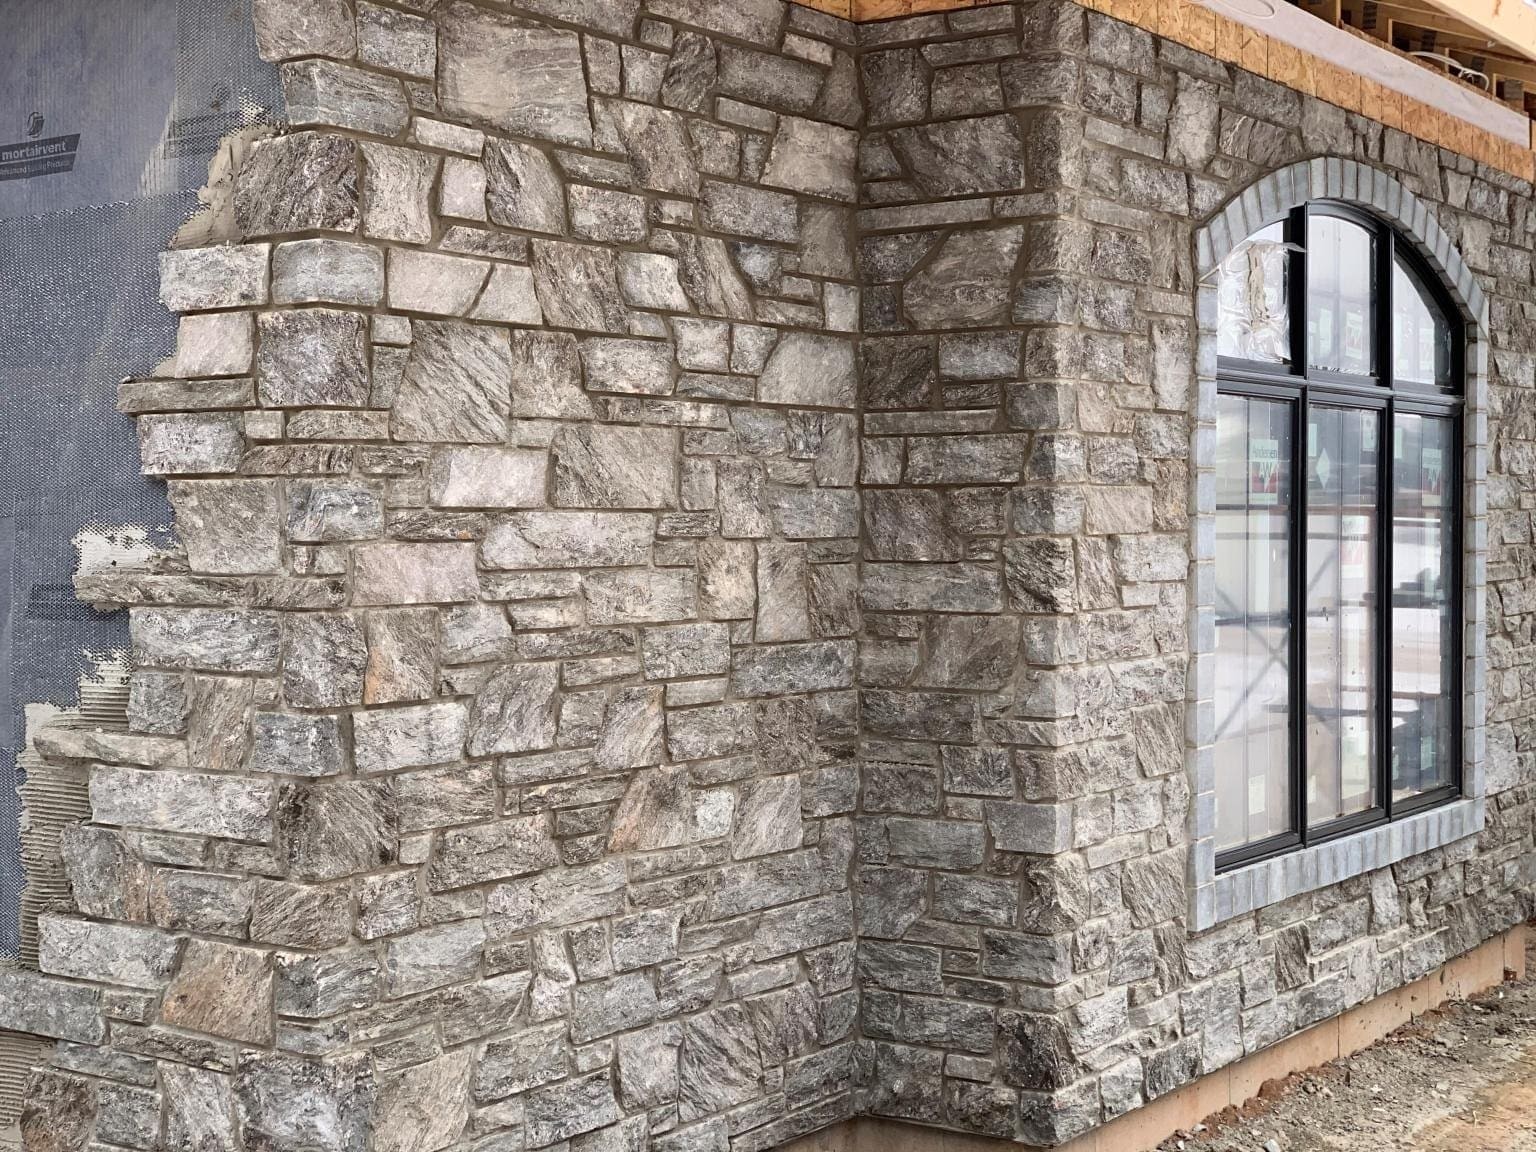 Dimensional natural stone veneer being installed on a residential exterior